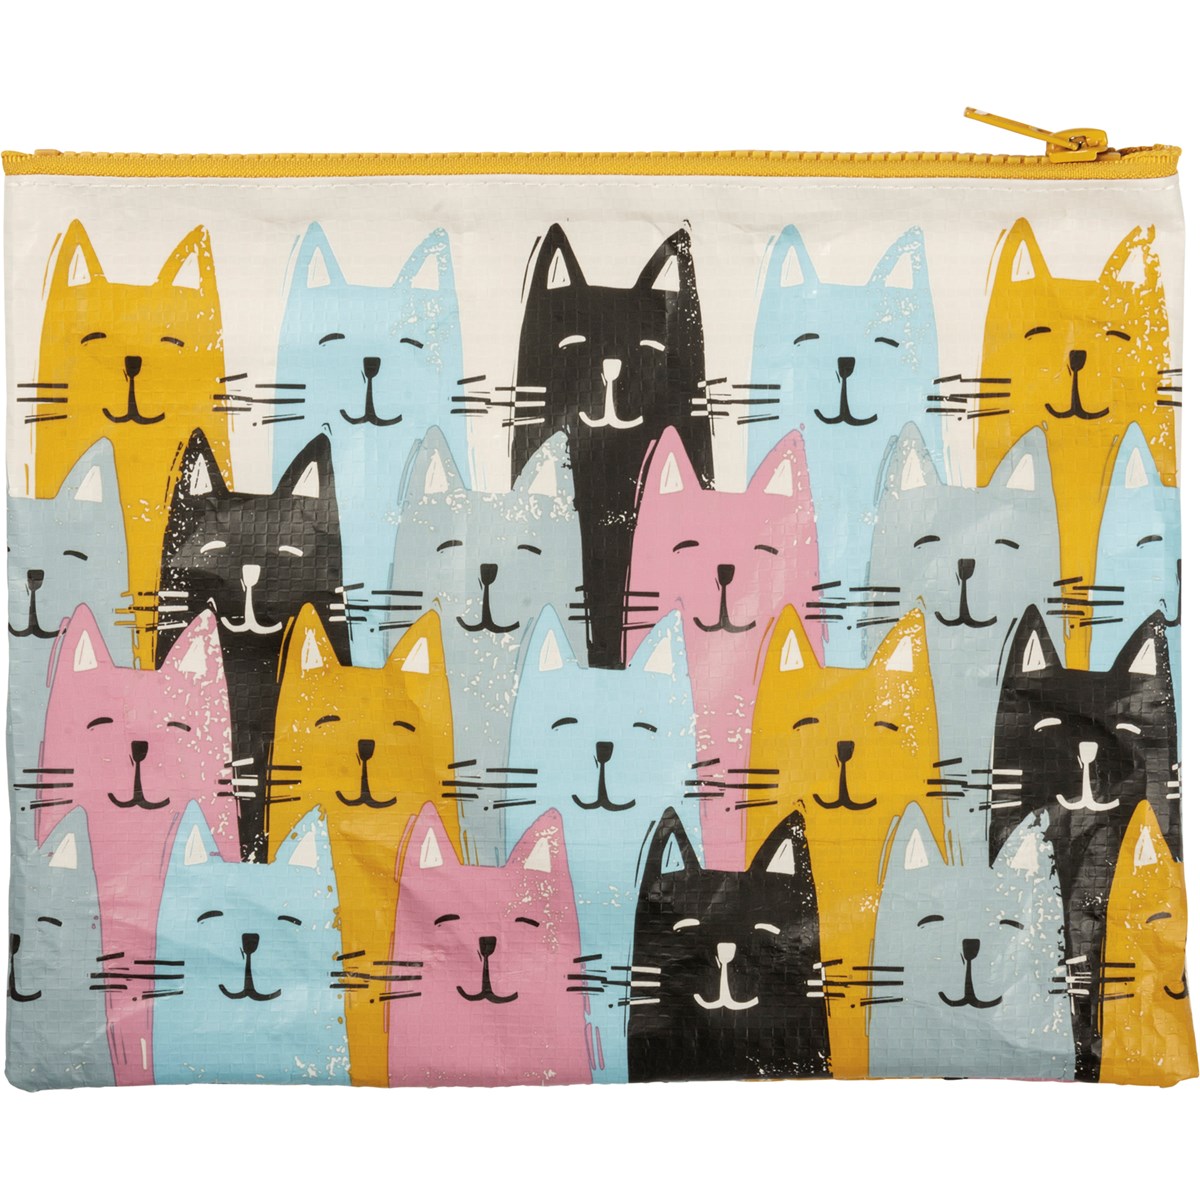 Zipper Pouch - One Cat Away From Crazy Cat Lady - 9.50" x 7" - Post-Consumer Material, Plastic, Metal